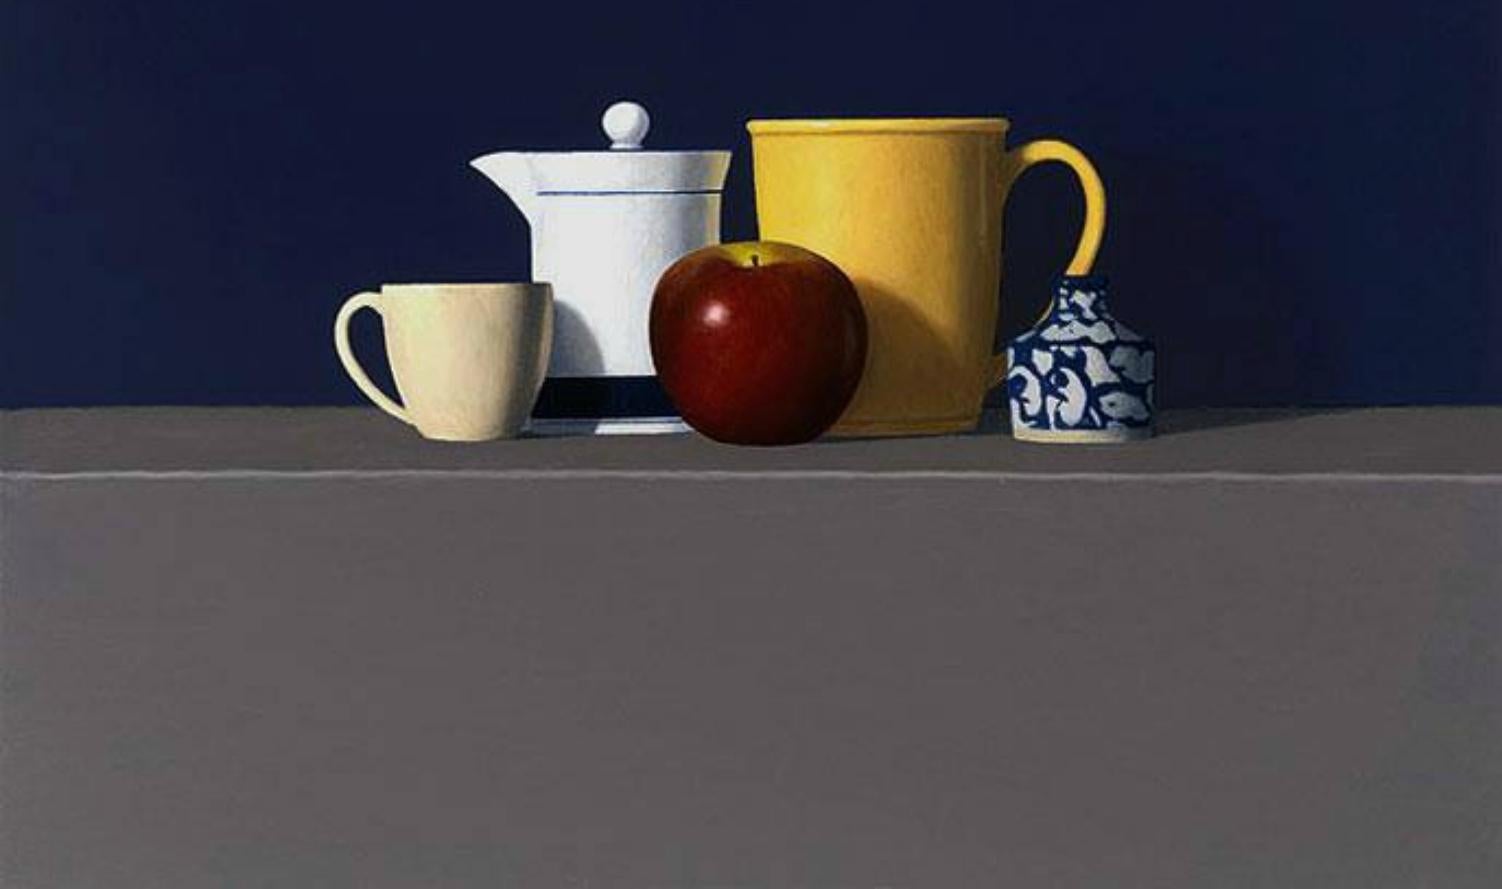  Red Apple w/ Four Objects , oil painting, American Realism, Realist Painter,  - Painting by David Harrison